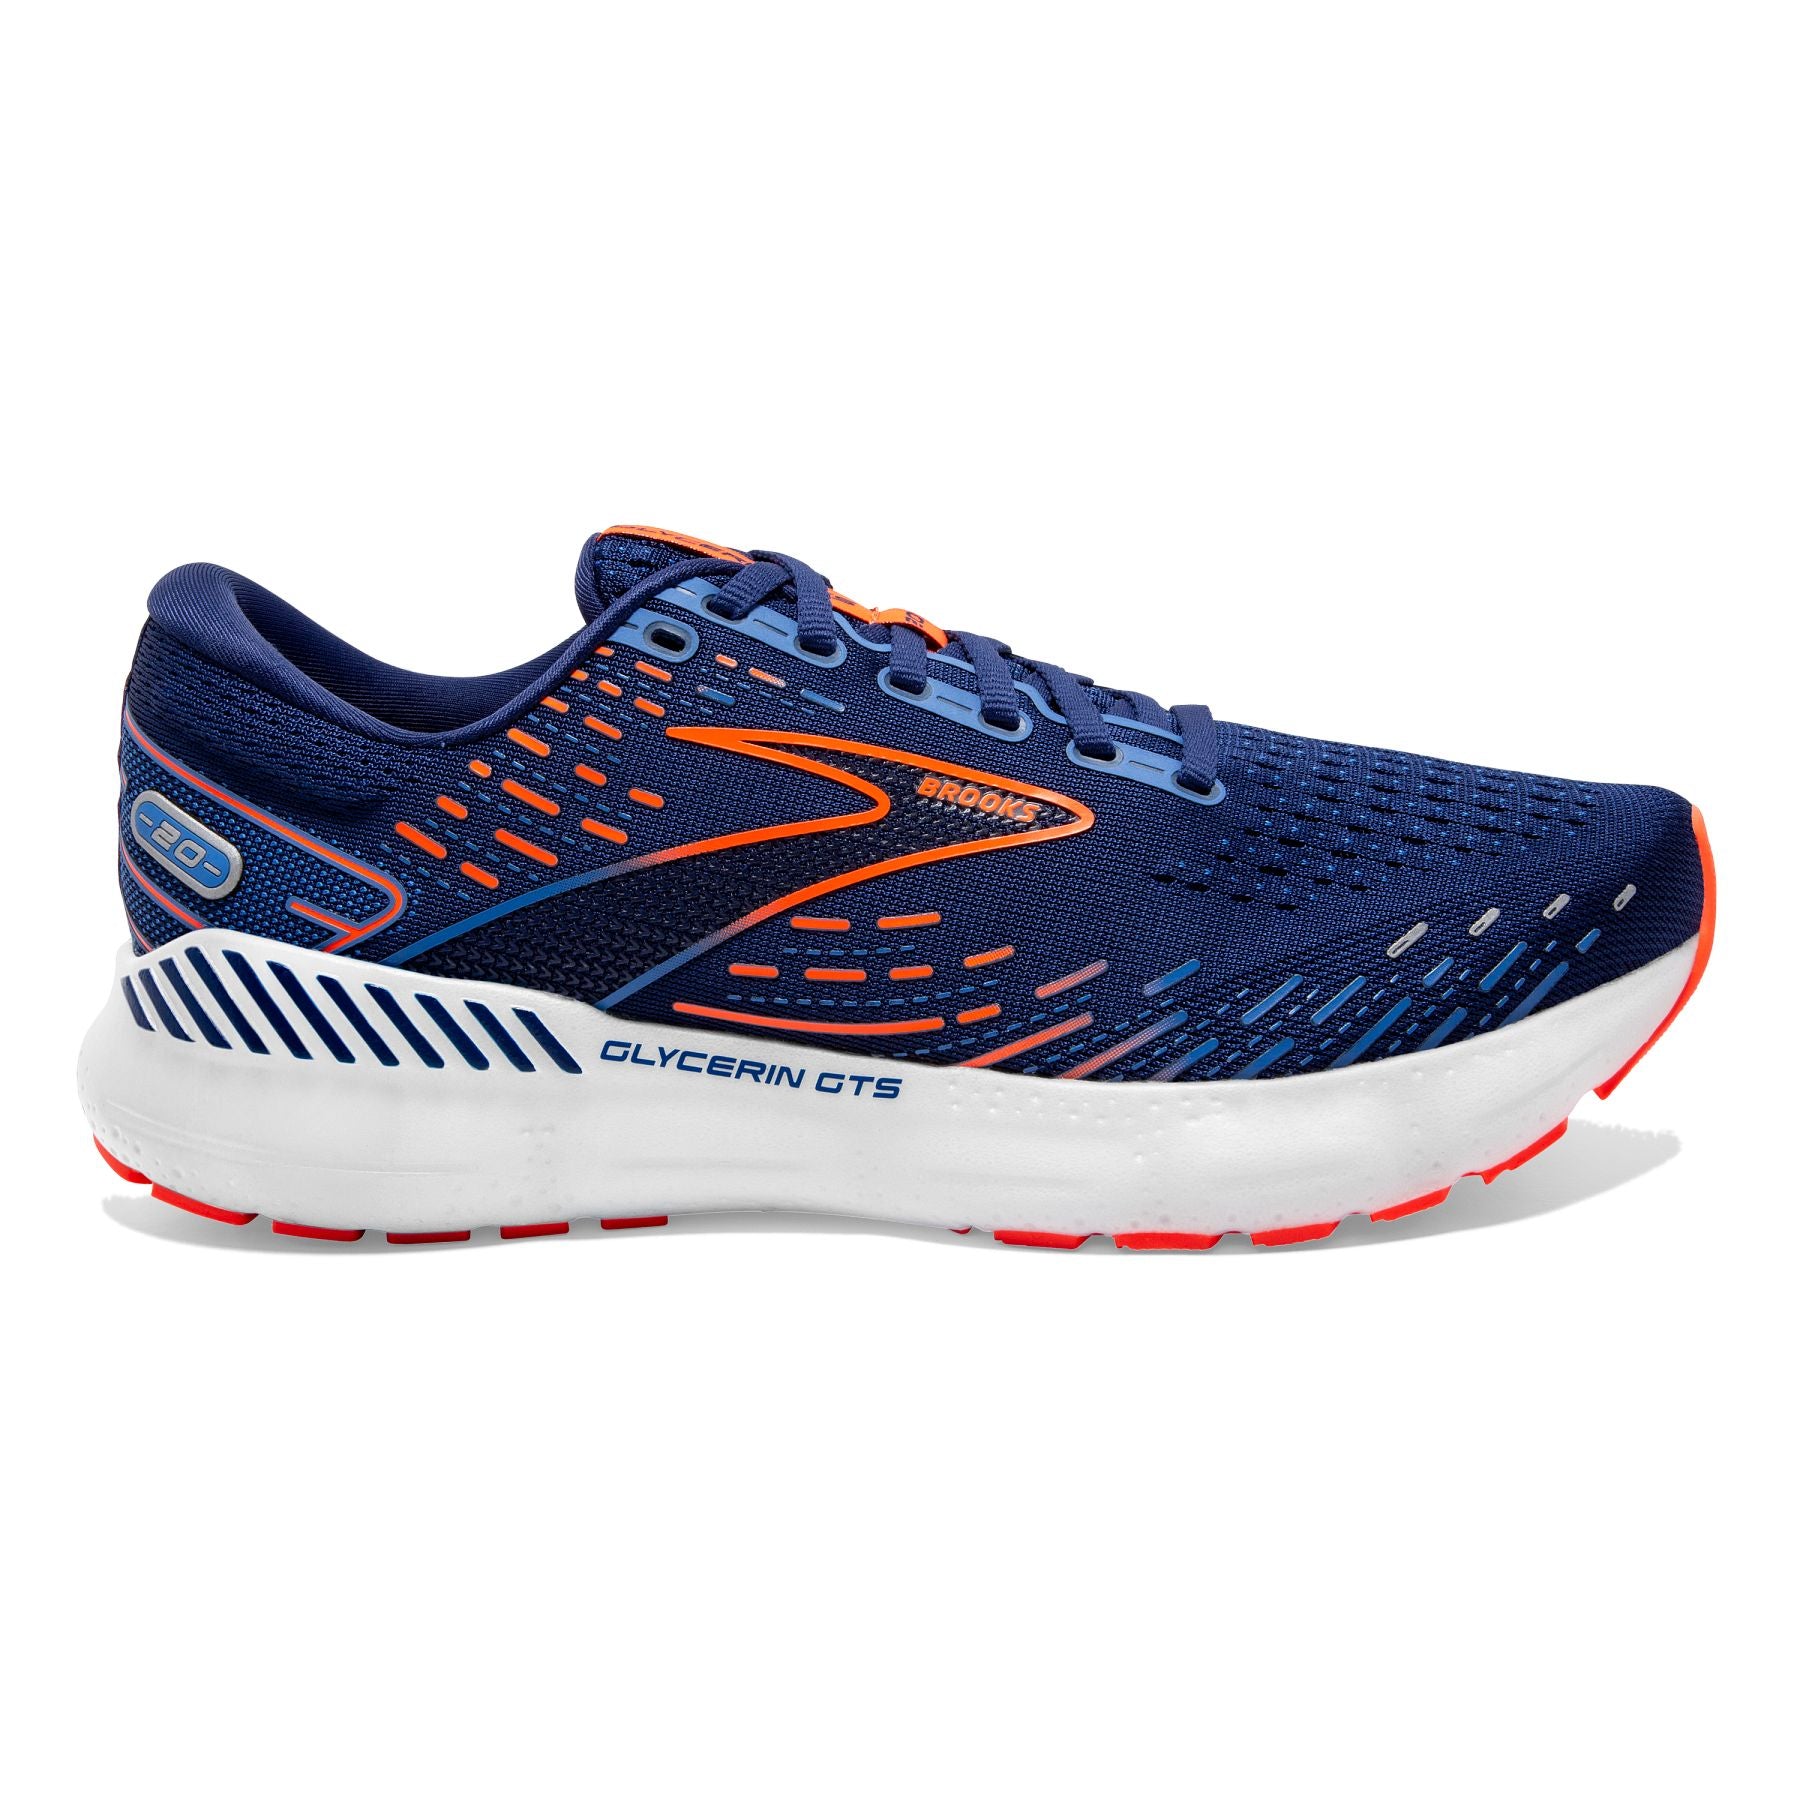 Lateral view of the Men's Glycerin GTS 20 in Blue Depths/Palace Blue/Orange